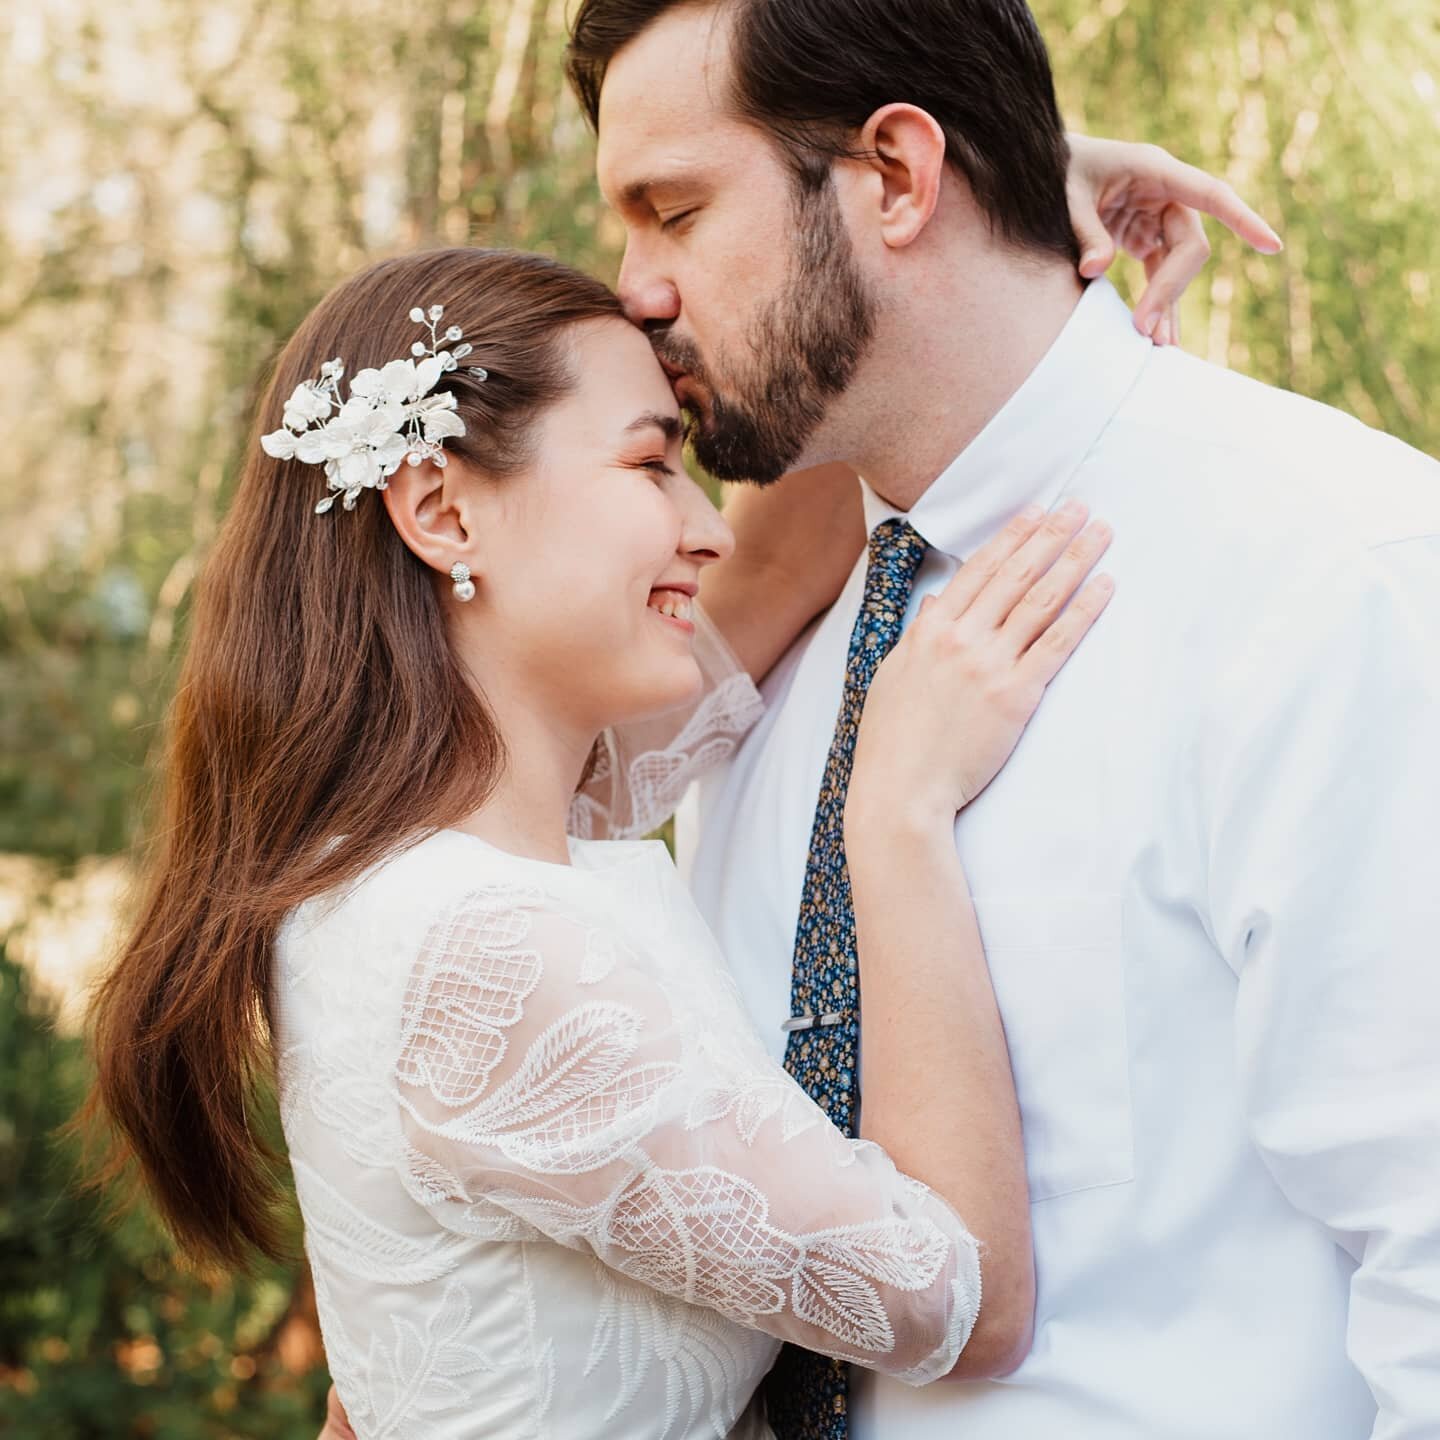 Alexa Rivera (@_alexarivera) took our wedding photos and they came out so well that I couldn't help sharing a few here ❤

Loved working with Alexa -- thanks for capturing the day for us!

https://alexarivera.photos/